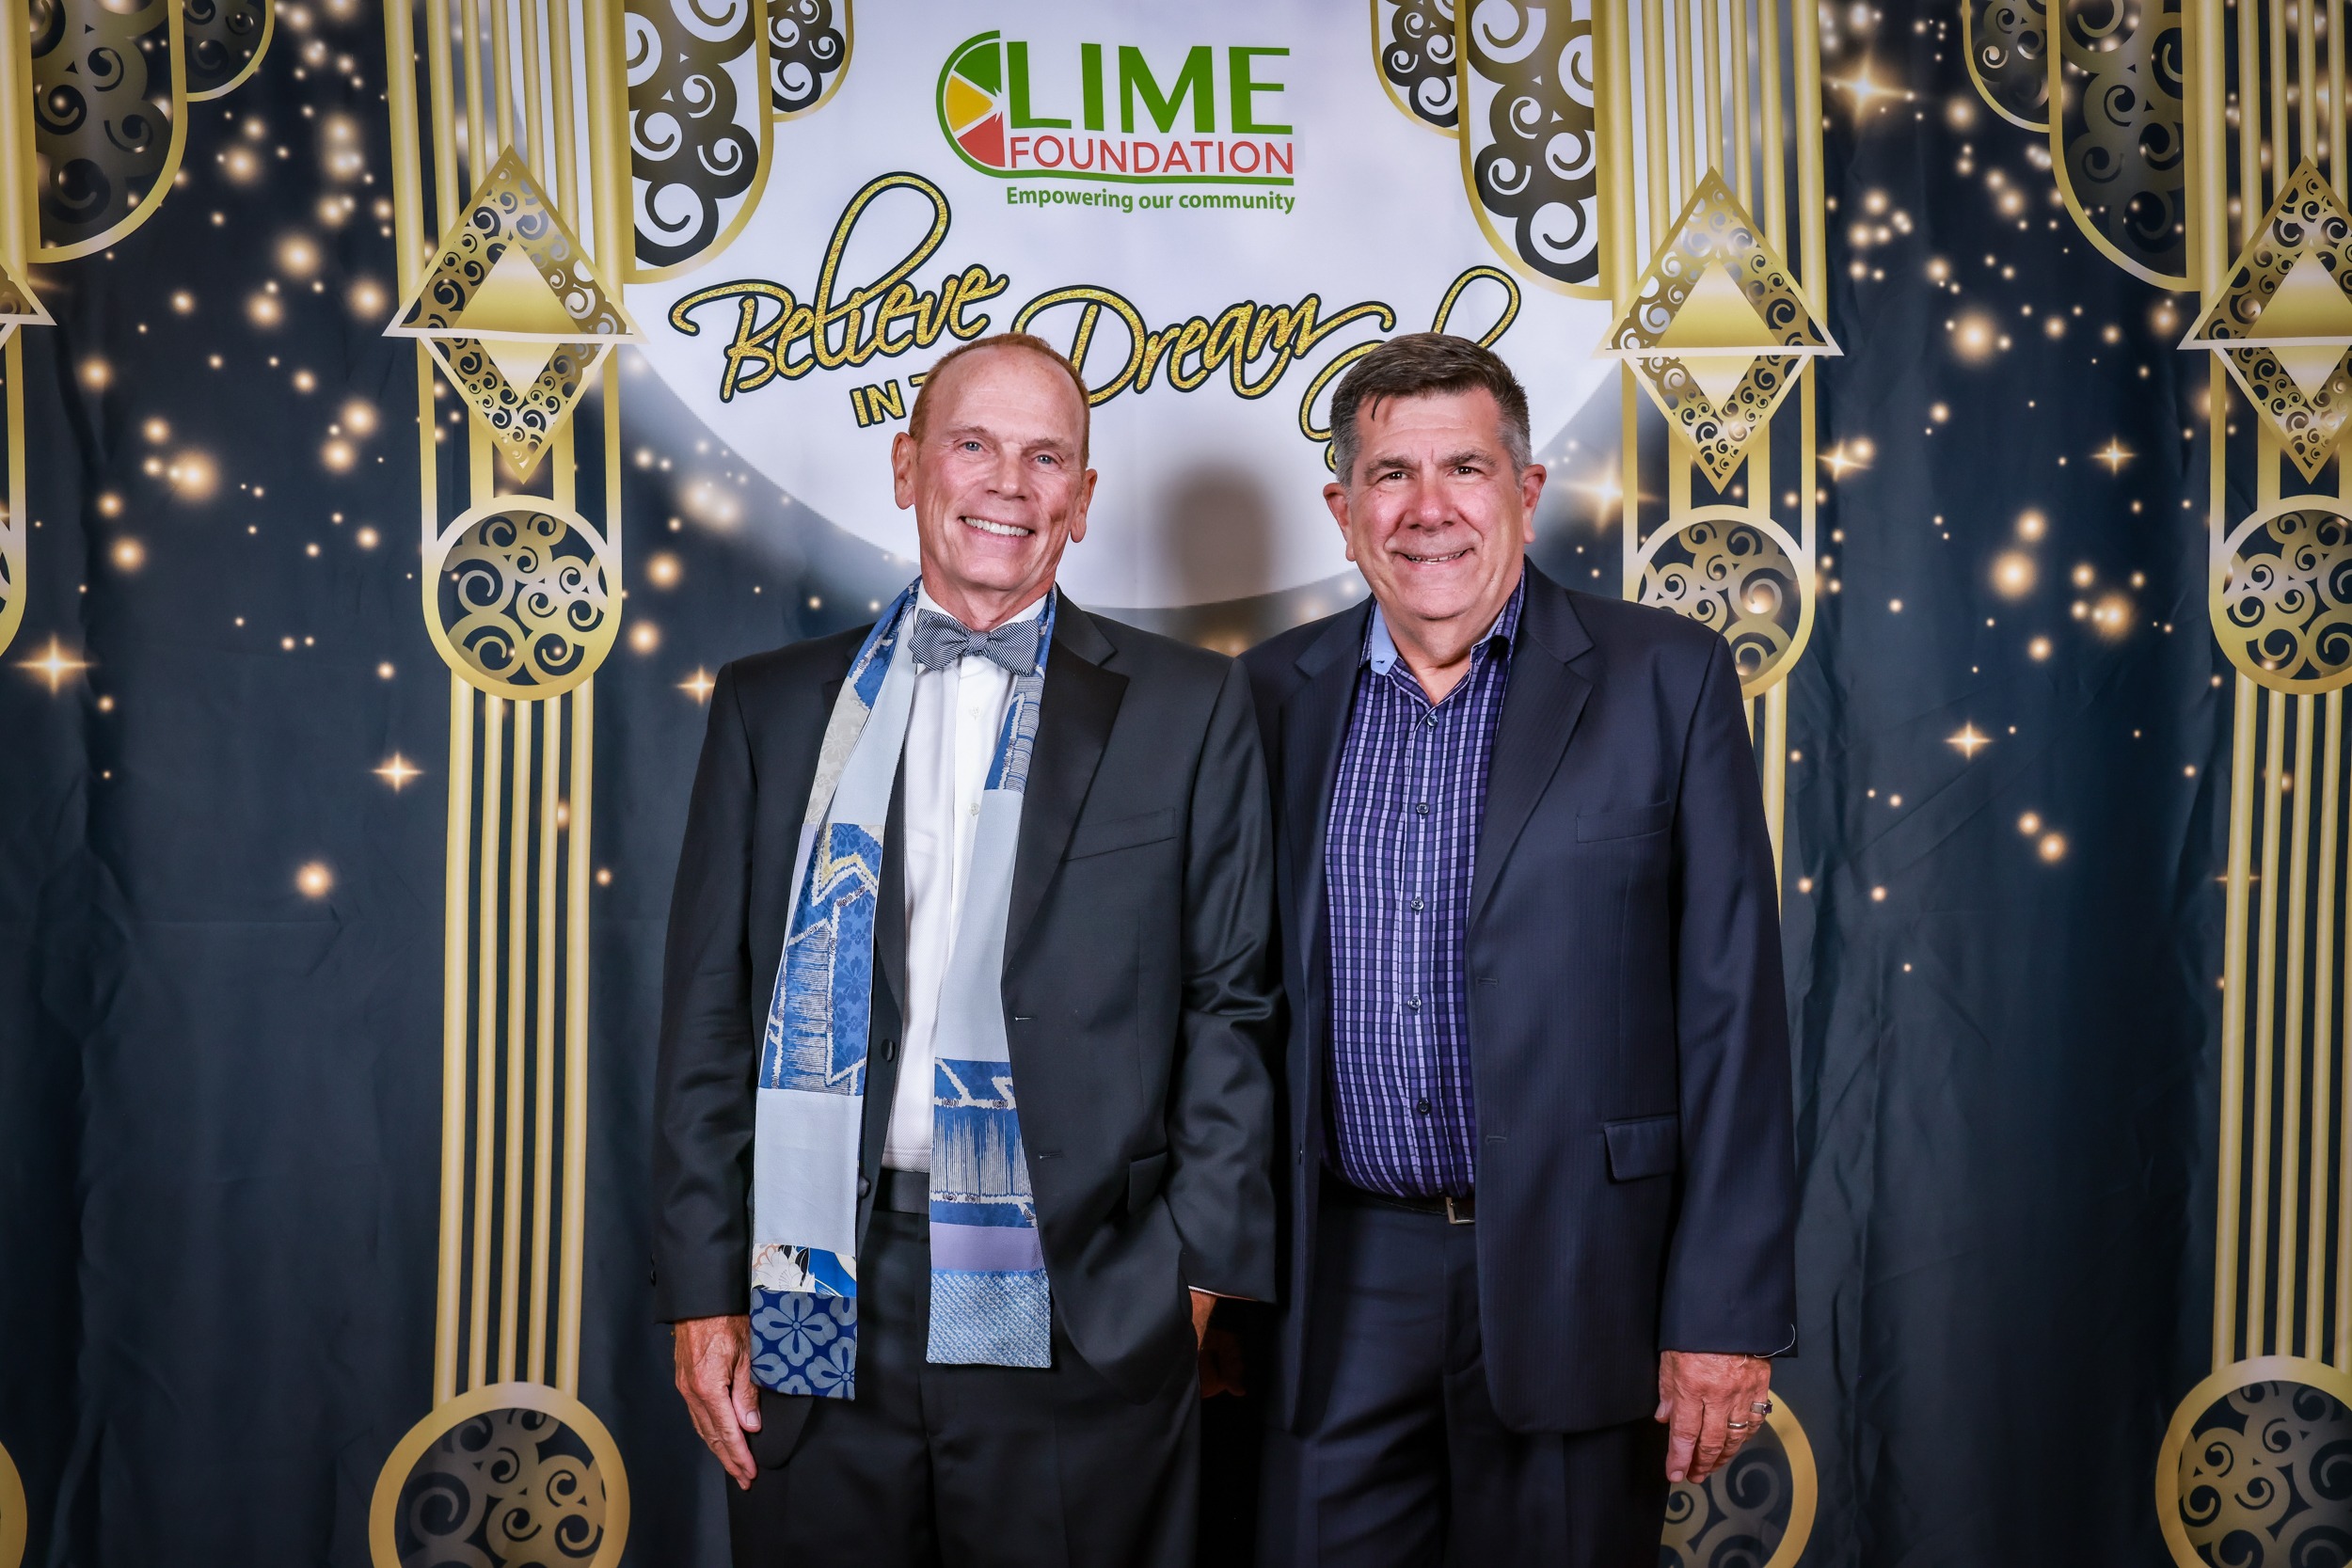 Two men posing for a picture in front of The LIME Foundation's backdrop.